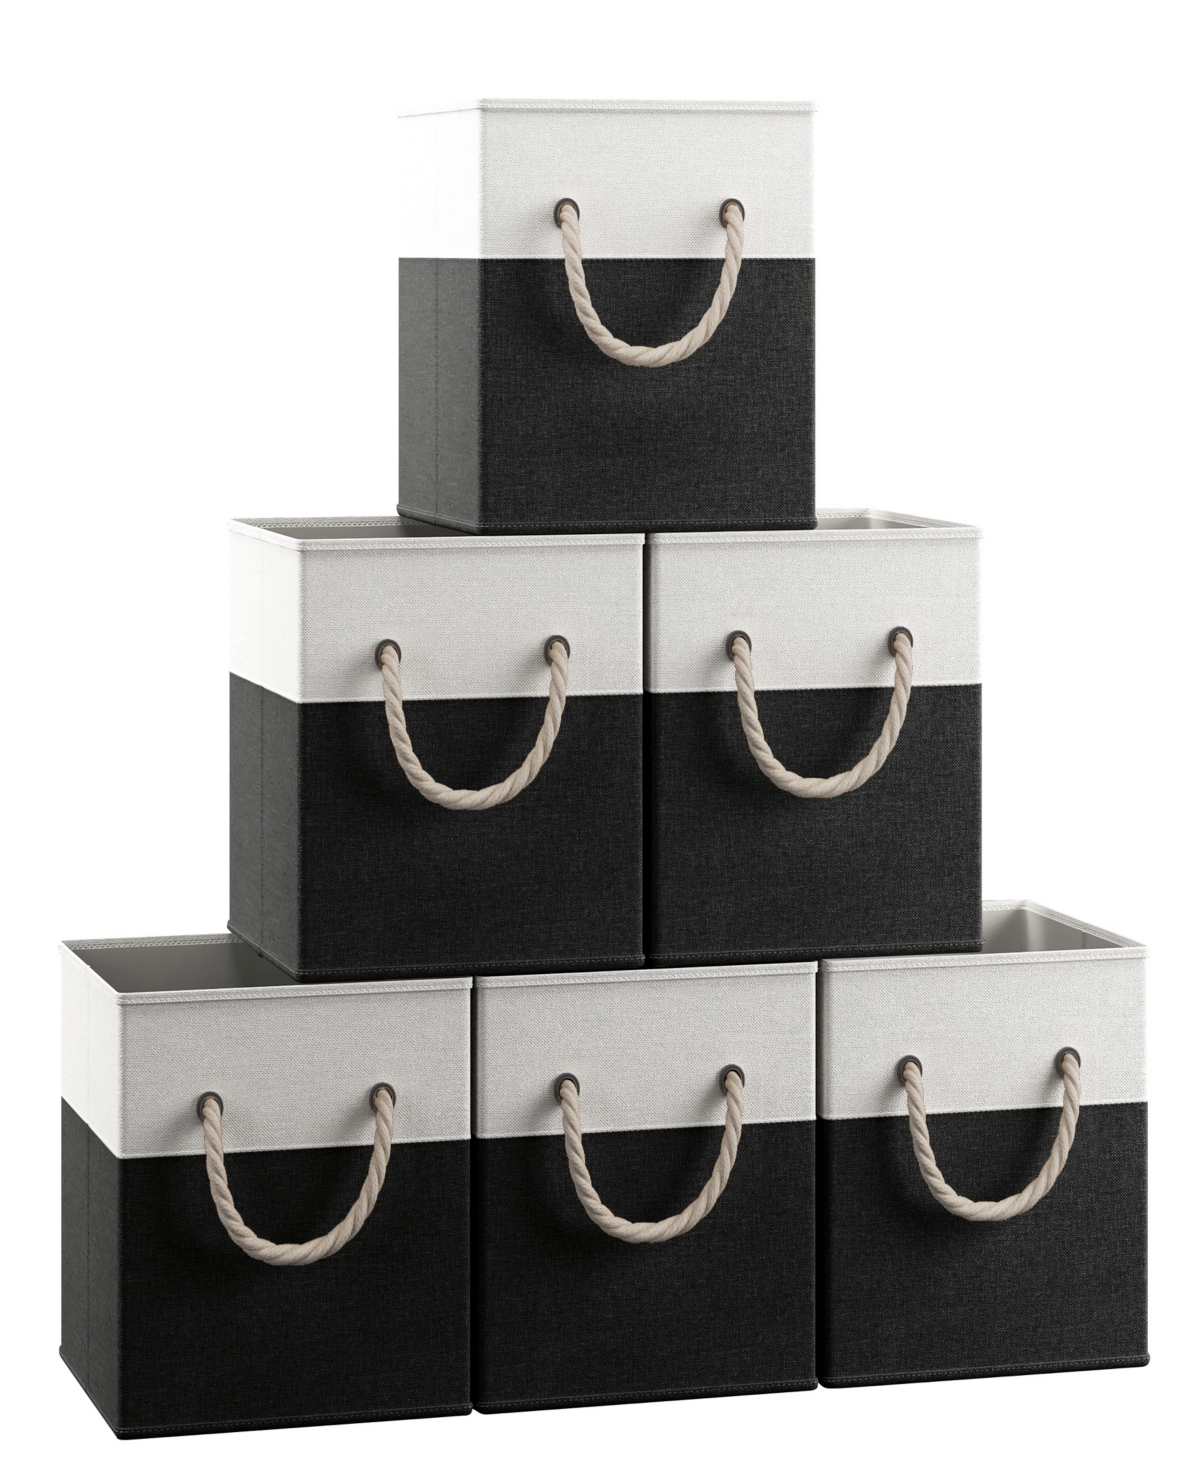 Ornavo Home Foldable Linen Storage Cube Bin With Rope Handles In White,black